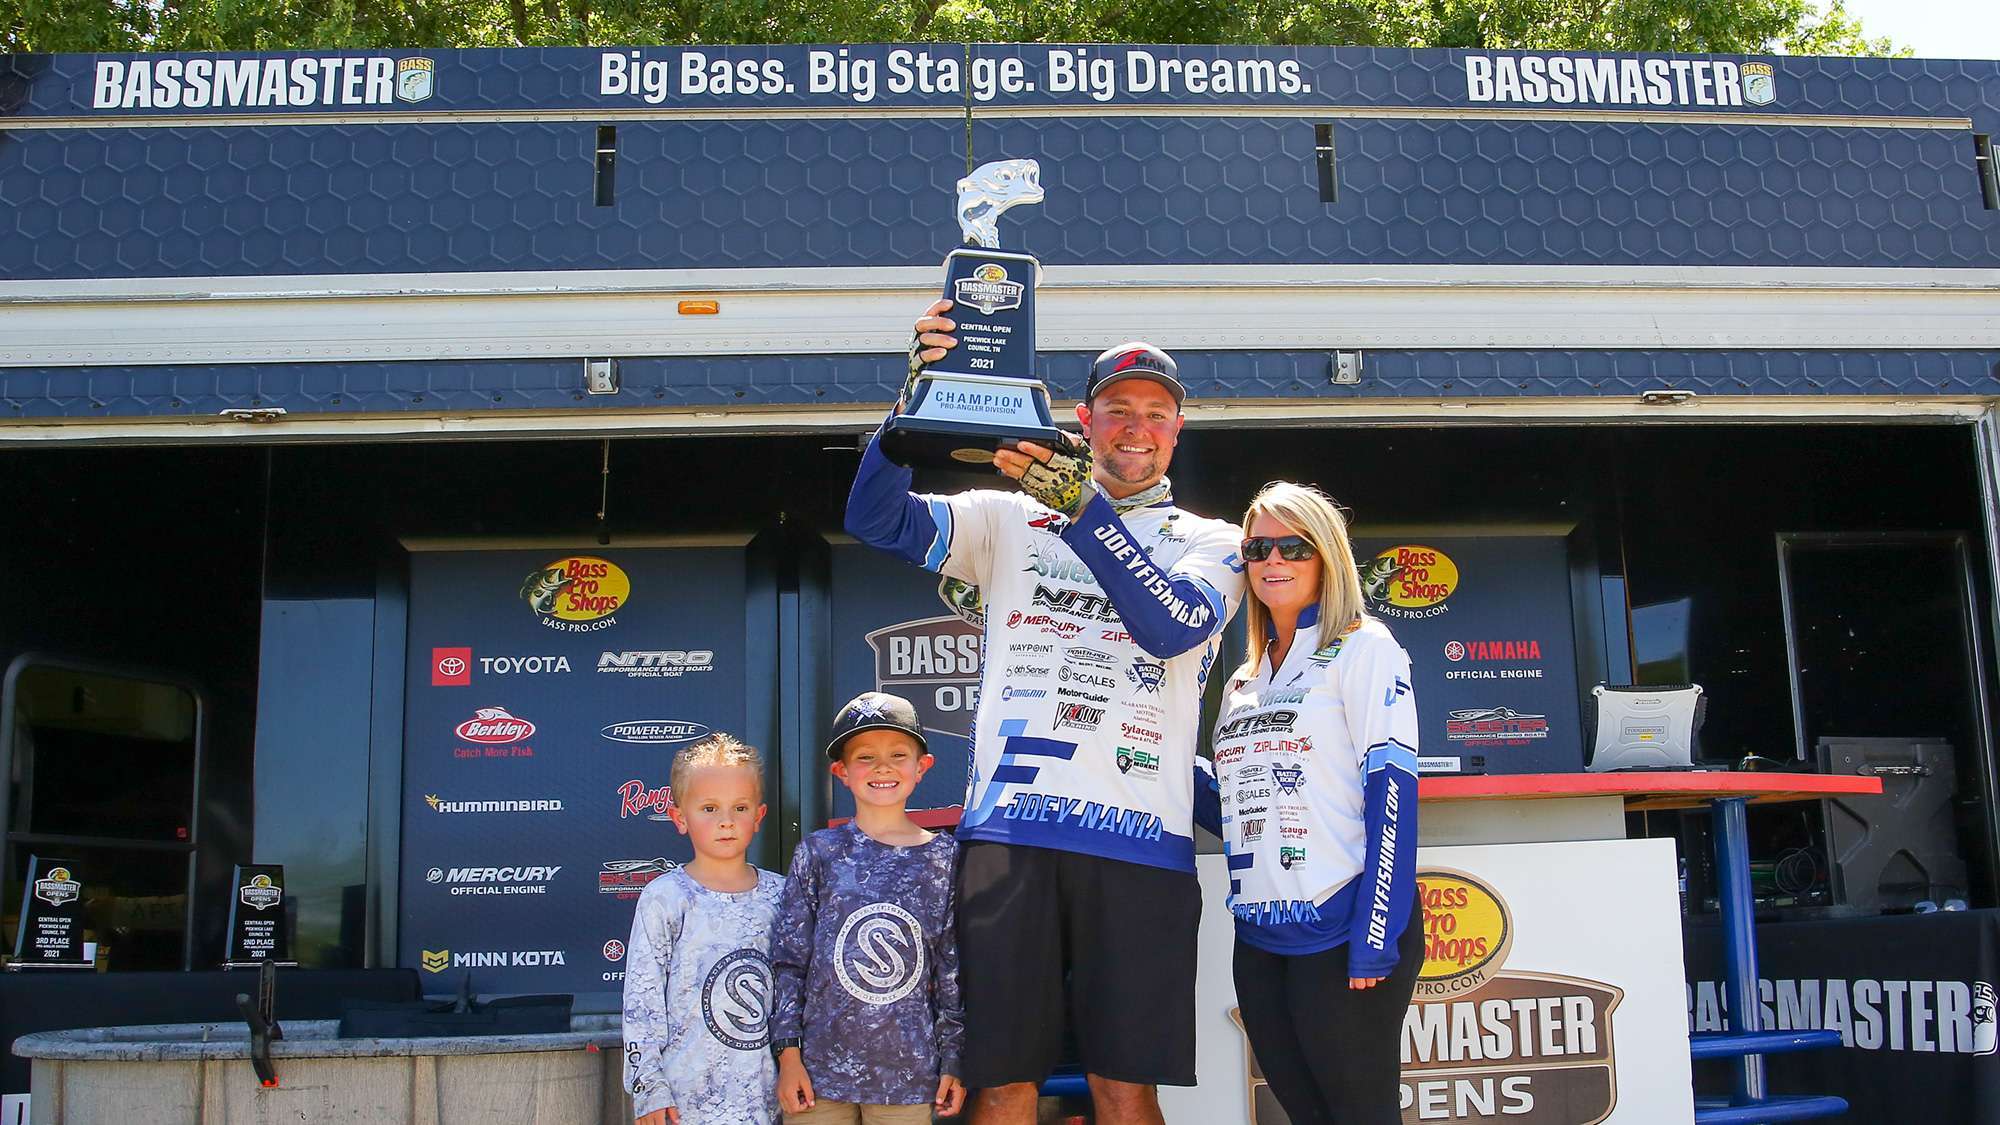 Joey Nania won the Basspro.com Bassmaster Central Open on Pickwick Lake in Tennessee, and with it, a berth in the 2022 Academy Sports + Outdoors Bassmaster Classic presented by Huk. 
<br><br>
<em>All captions: Craig Lamb</em>
